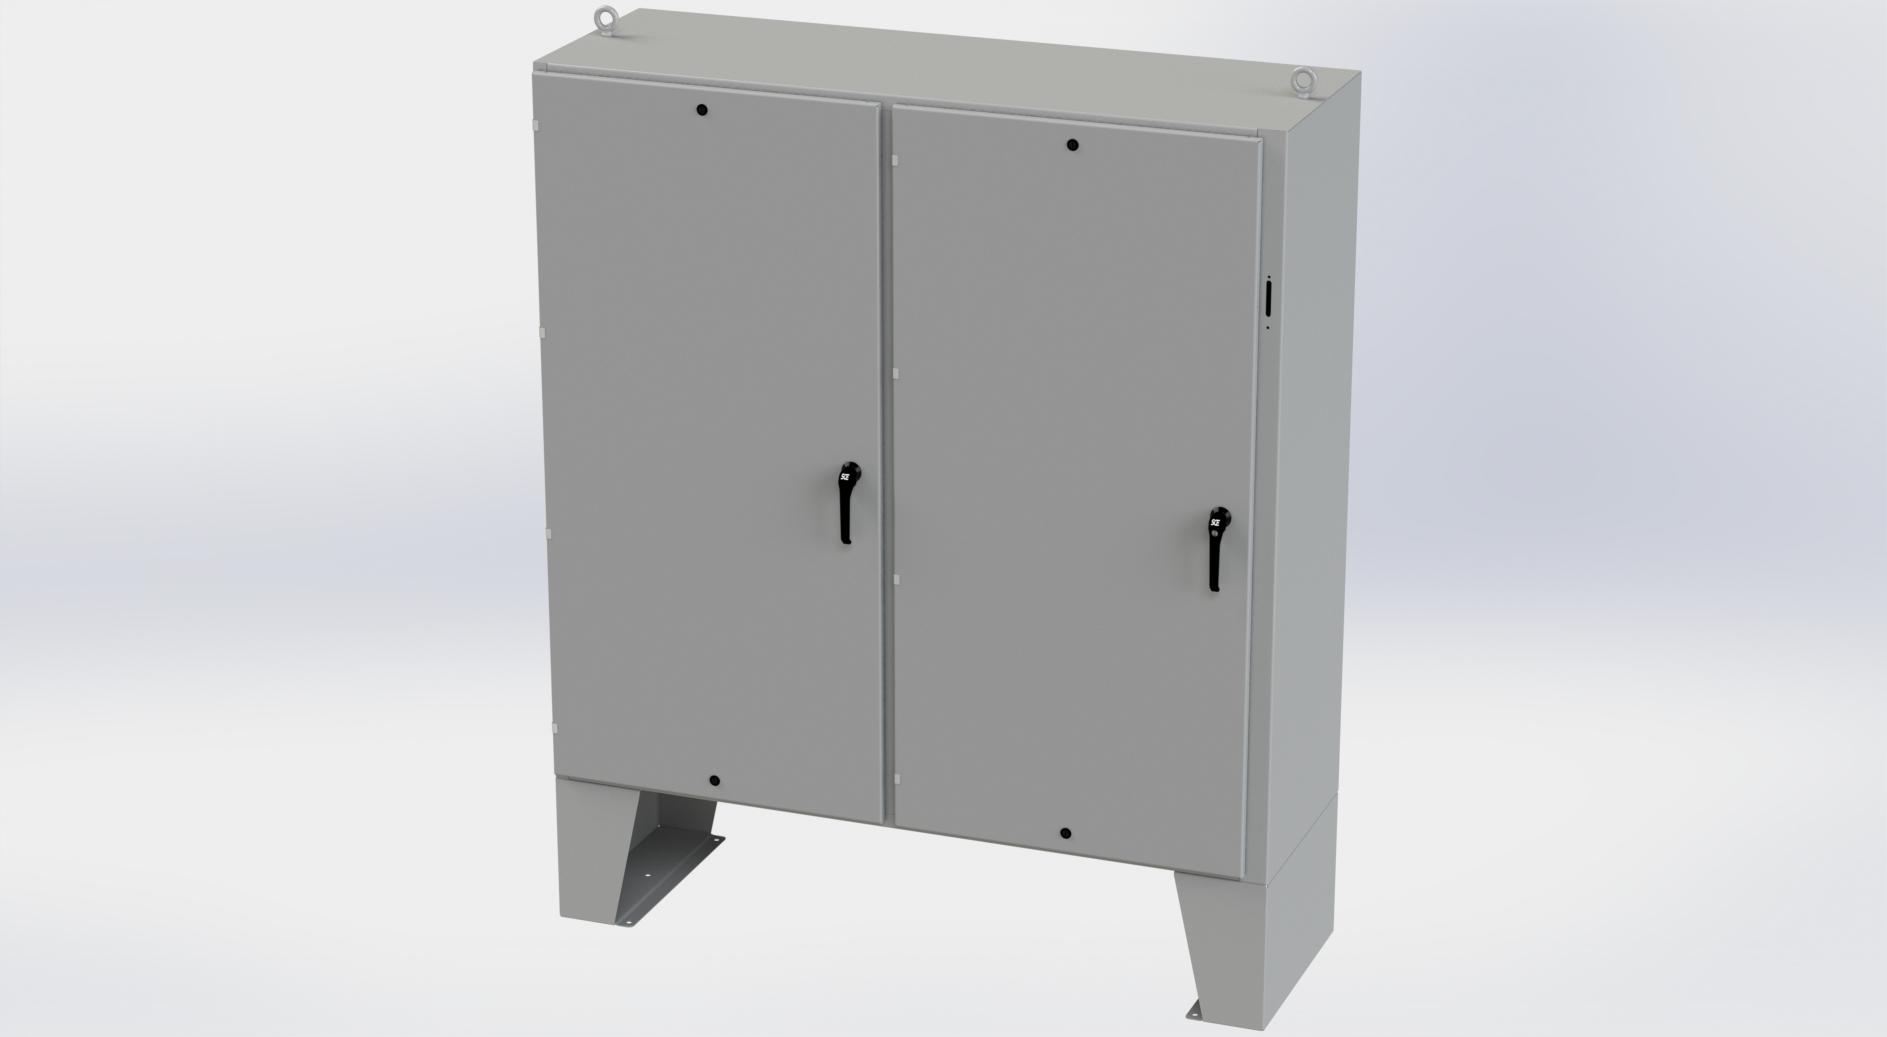 Saginaw Control SCE-72XEL7324LP 2DR XEL Enclosure, Height:72.00", Width:73.00", Depth:24.00", ANSI-61 gray powder coating inside and out. Optional sub-panels are powder coated white.